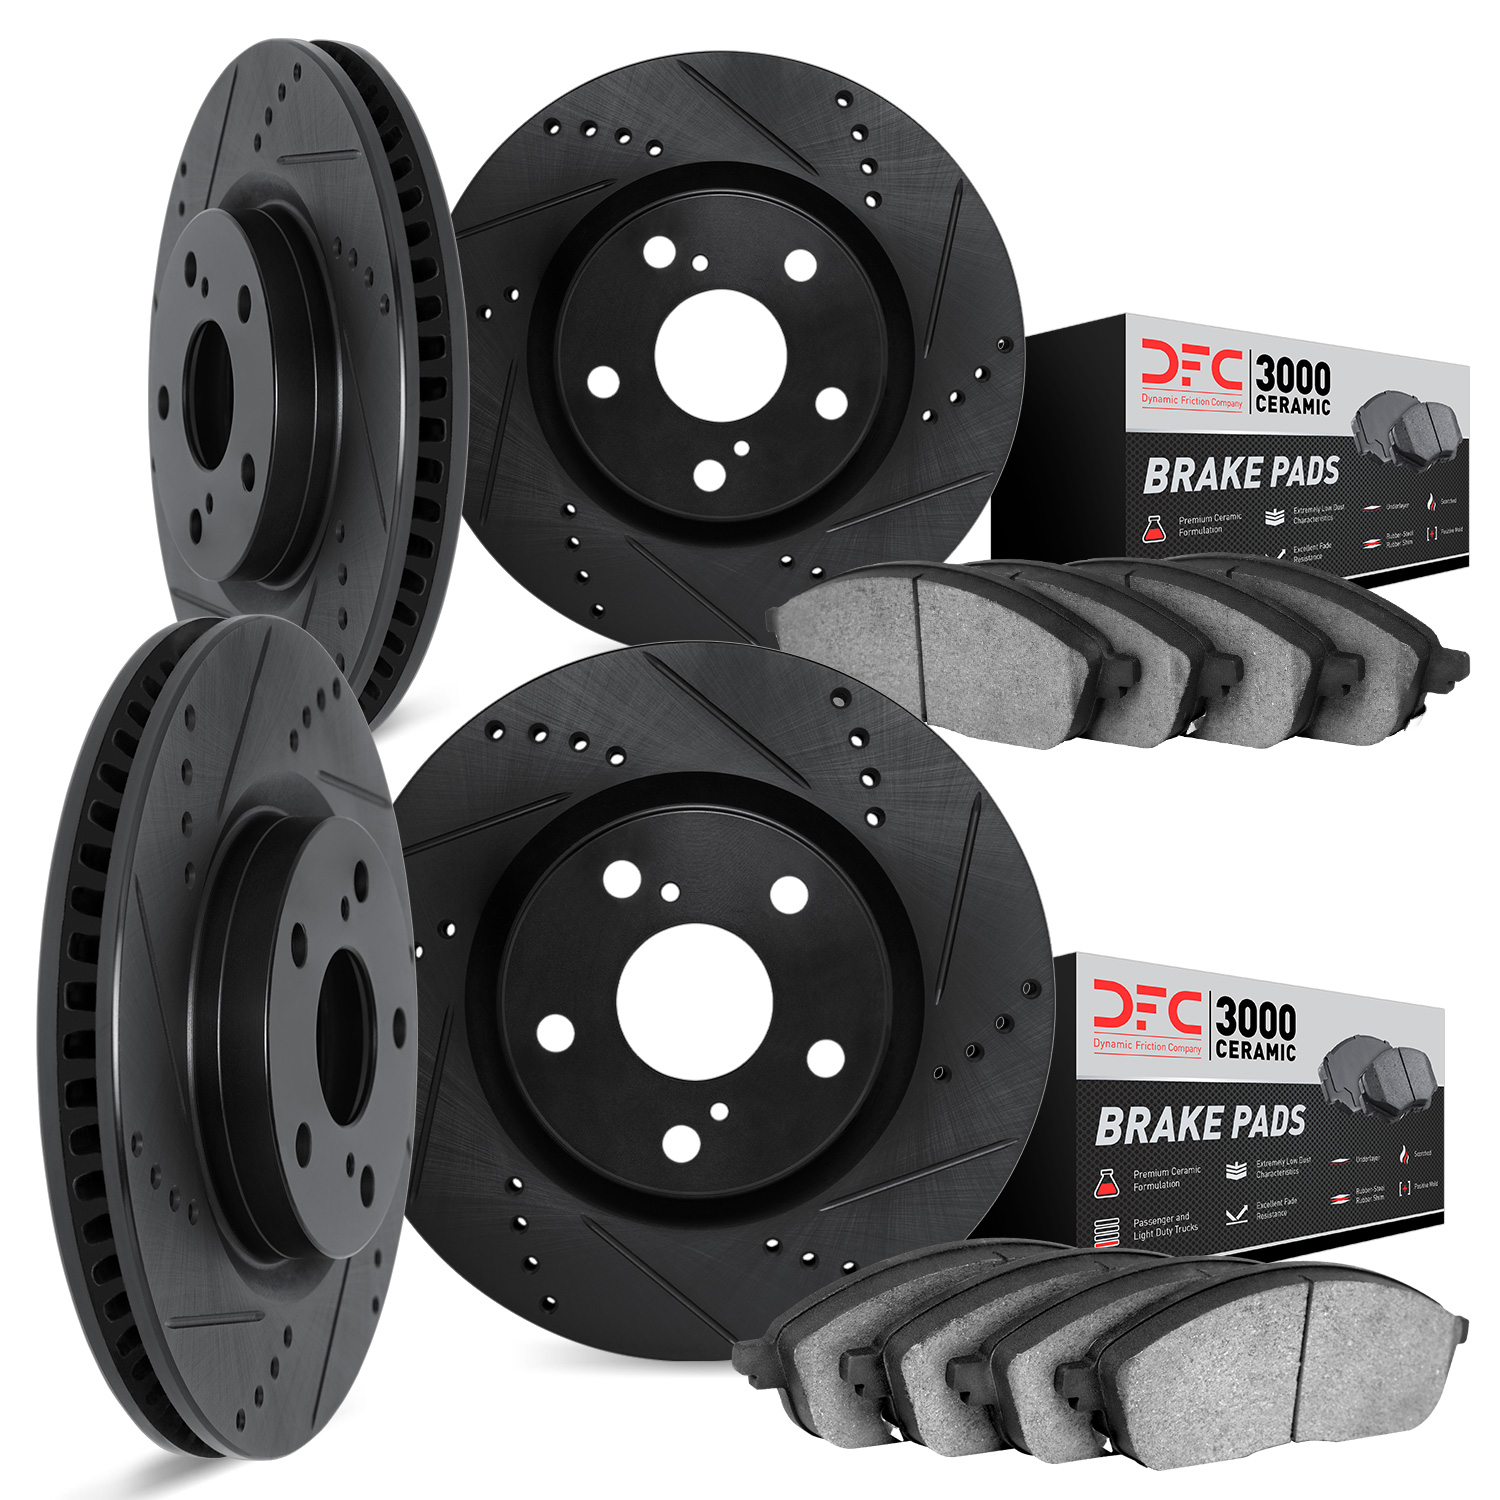 8304-31059 Drilled/Slotted Brake Rotors with 3000-Series Ceramic Brake Pads Kit [Black], 2006-2007 BMW, Position: Front and Rear